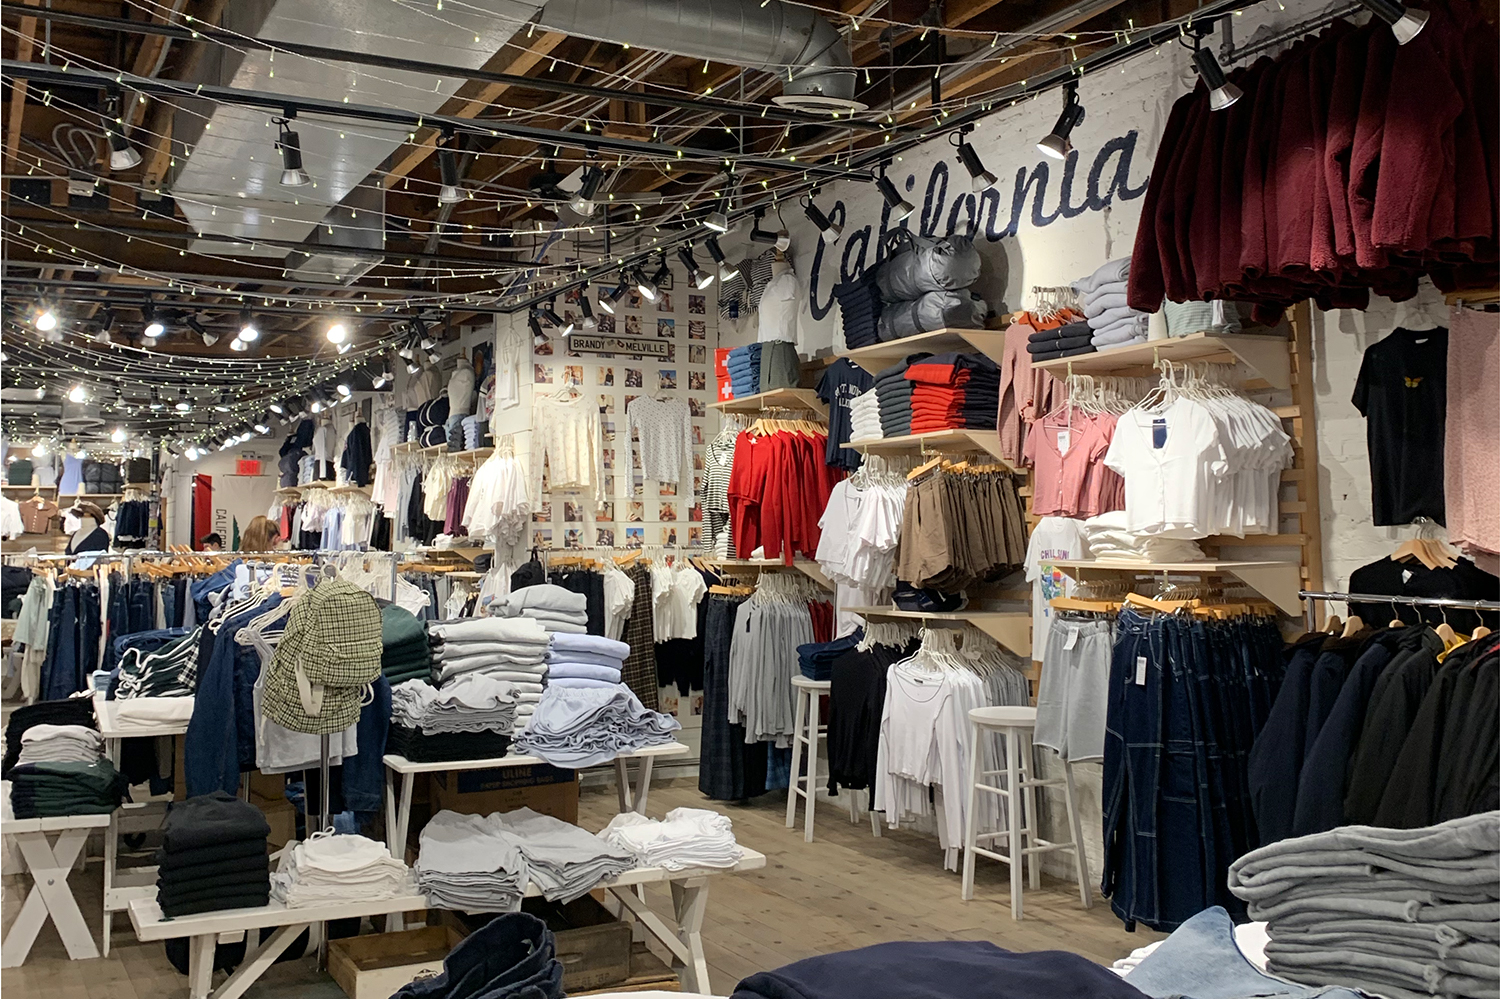 One size does not fit all': Students reflect on 'exclusive nature' of Brandy  Melville's sizing – The Oracle